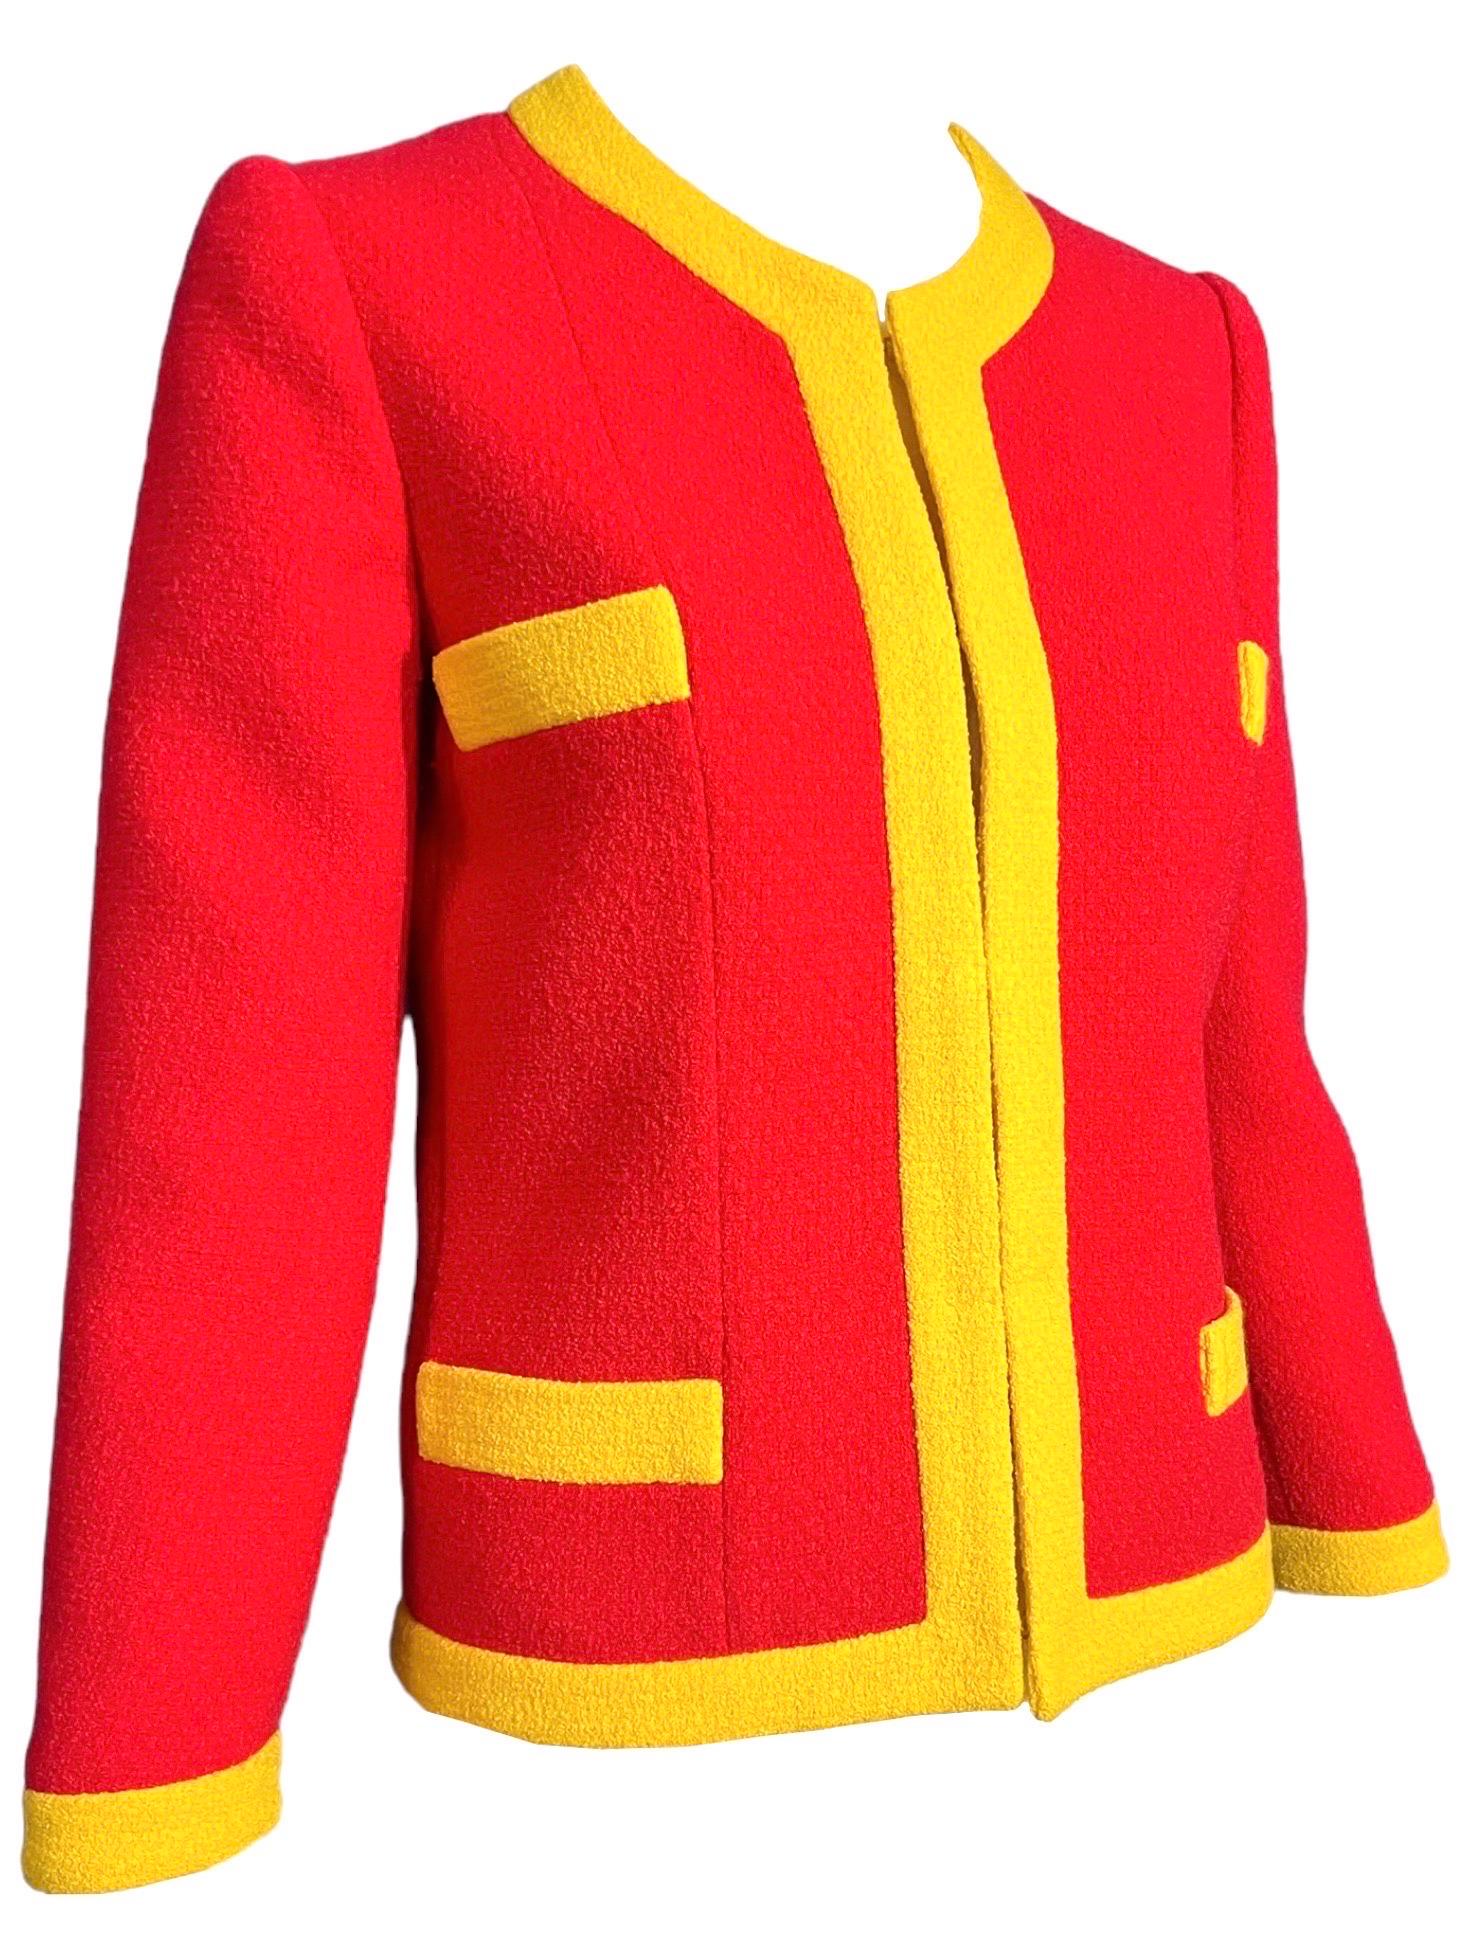 Moschino Couture McDonalds Runway Tweed Blazer F/W 2014 For Sale 5